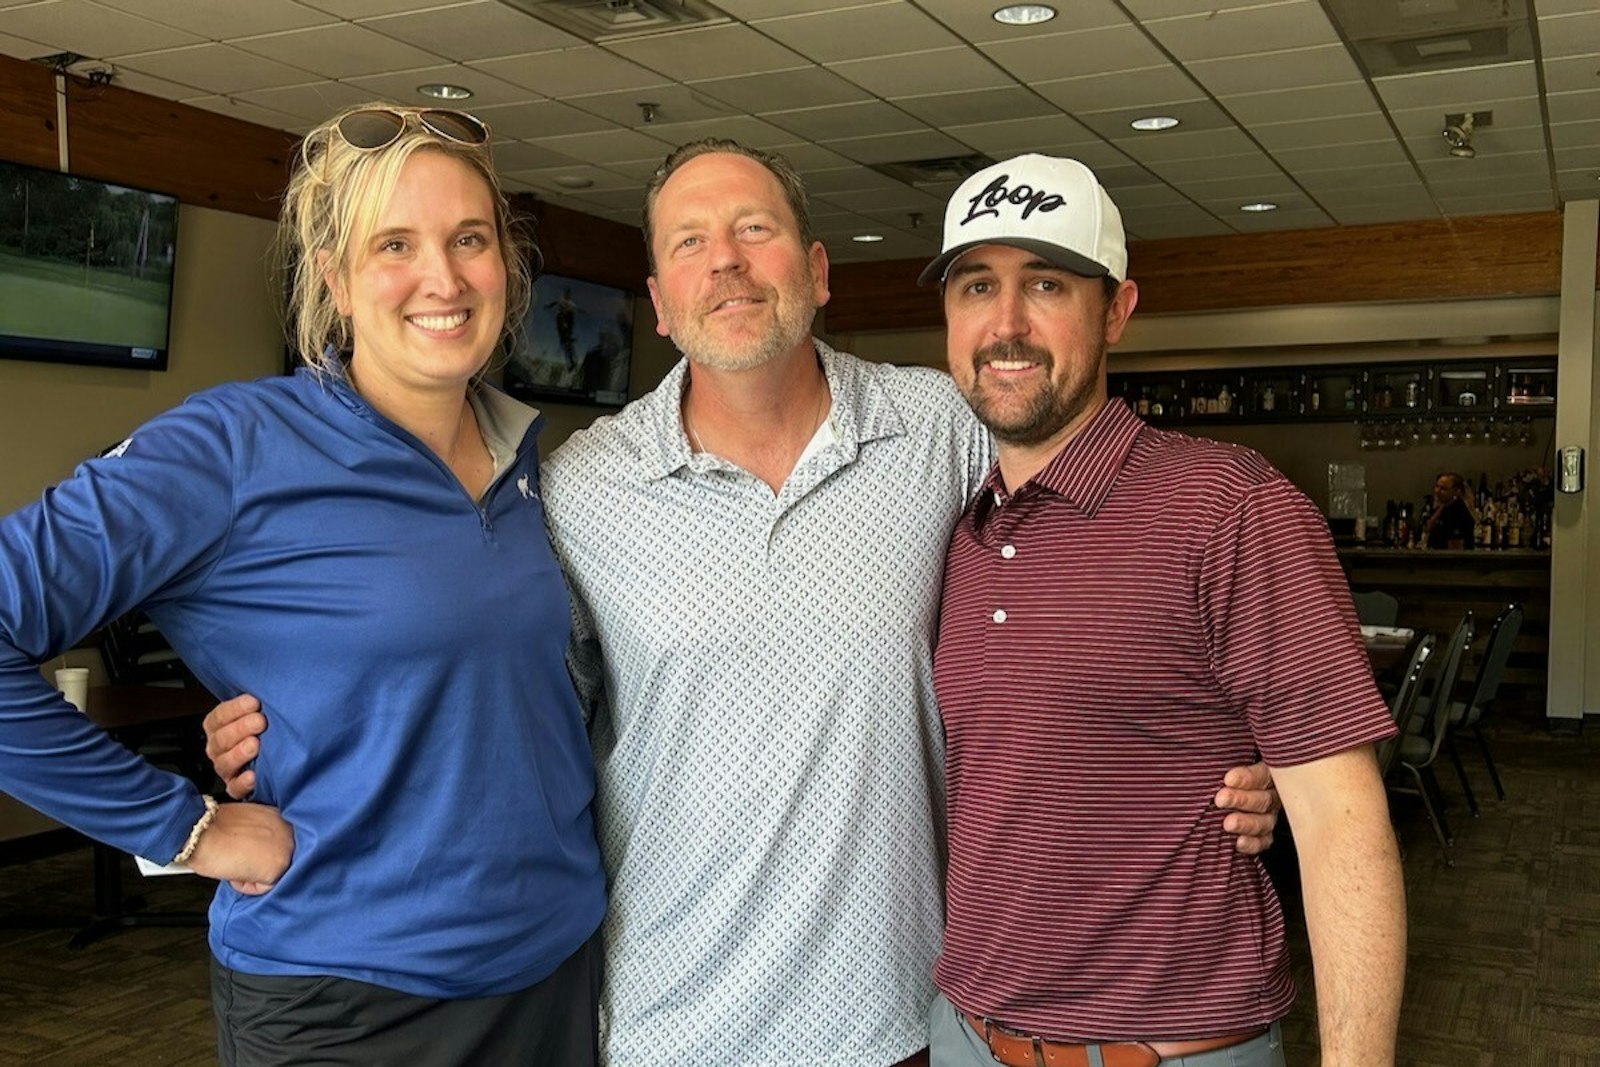 Lisa Kullman, Joe Charnley and Jeff Kator gather after the family's first golf outing for The Charnley Foundation. More than 100 people came out to support the event.